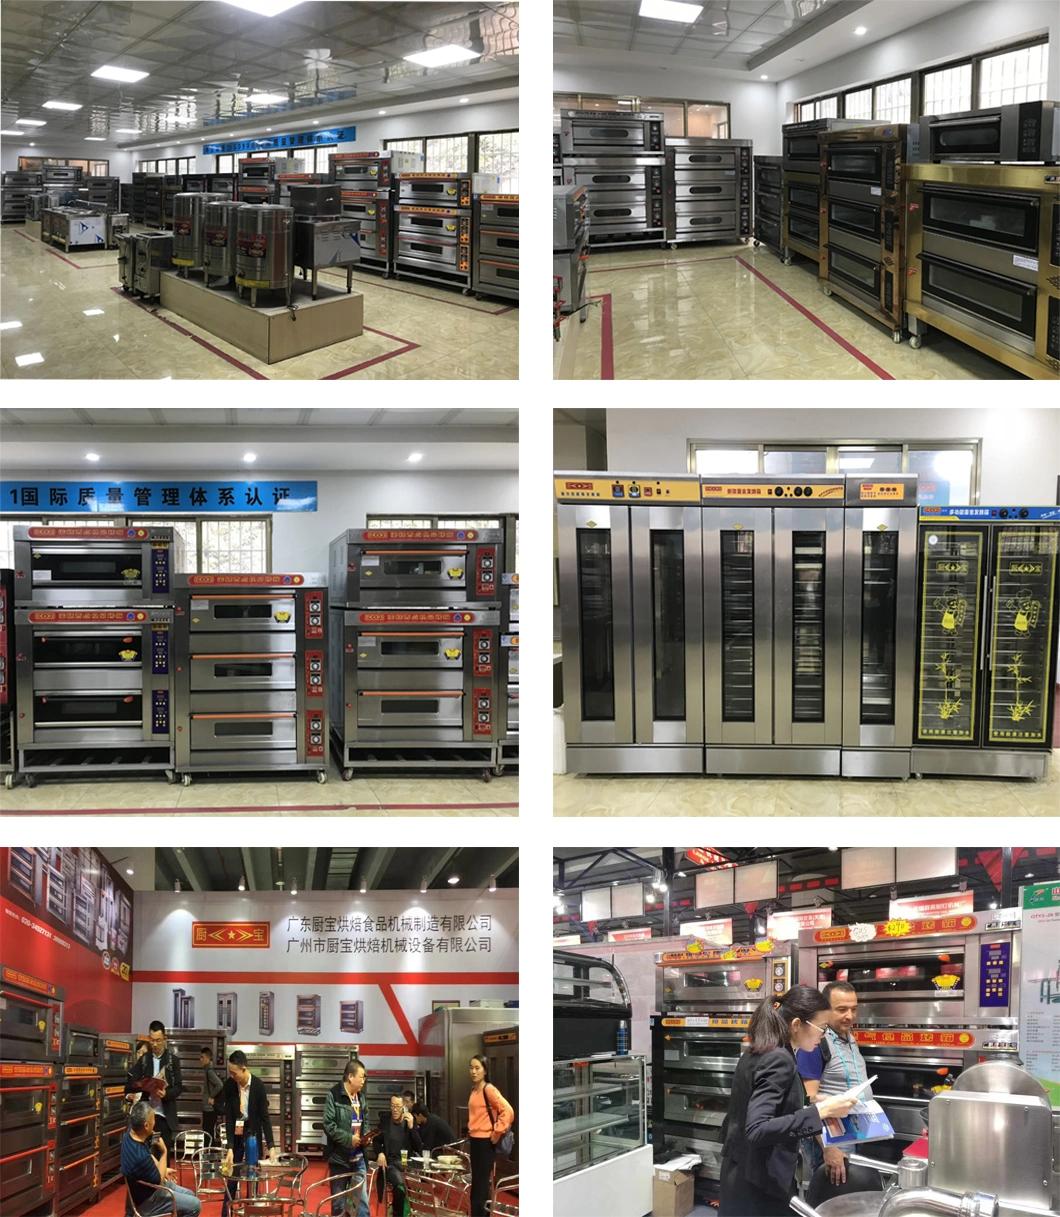 3 Deck 6 Trays Luxury Electric Oven for Commercial Restaurant Kitchen Baking Equipment Bakery Machinery Food Machine with Computer Controller Food Oven